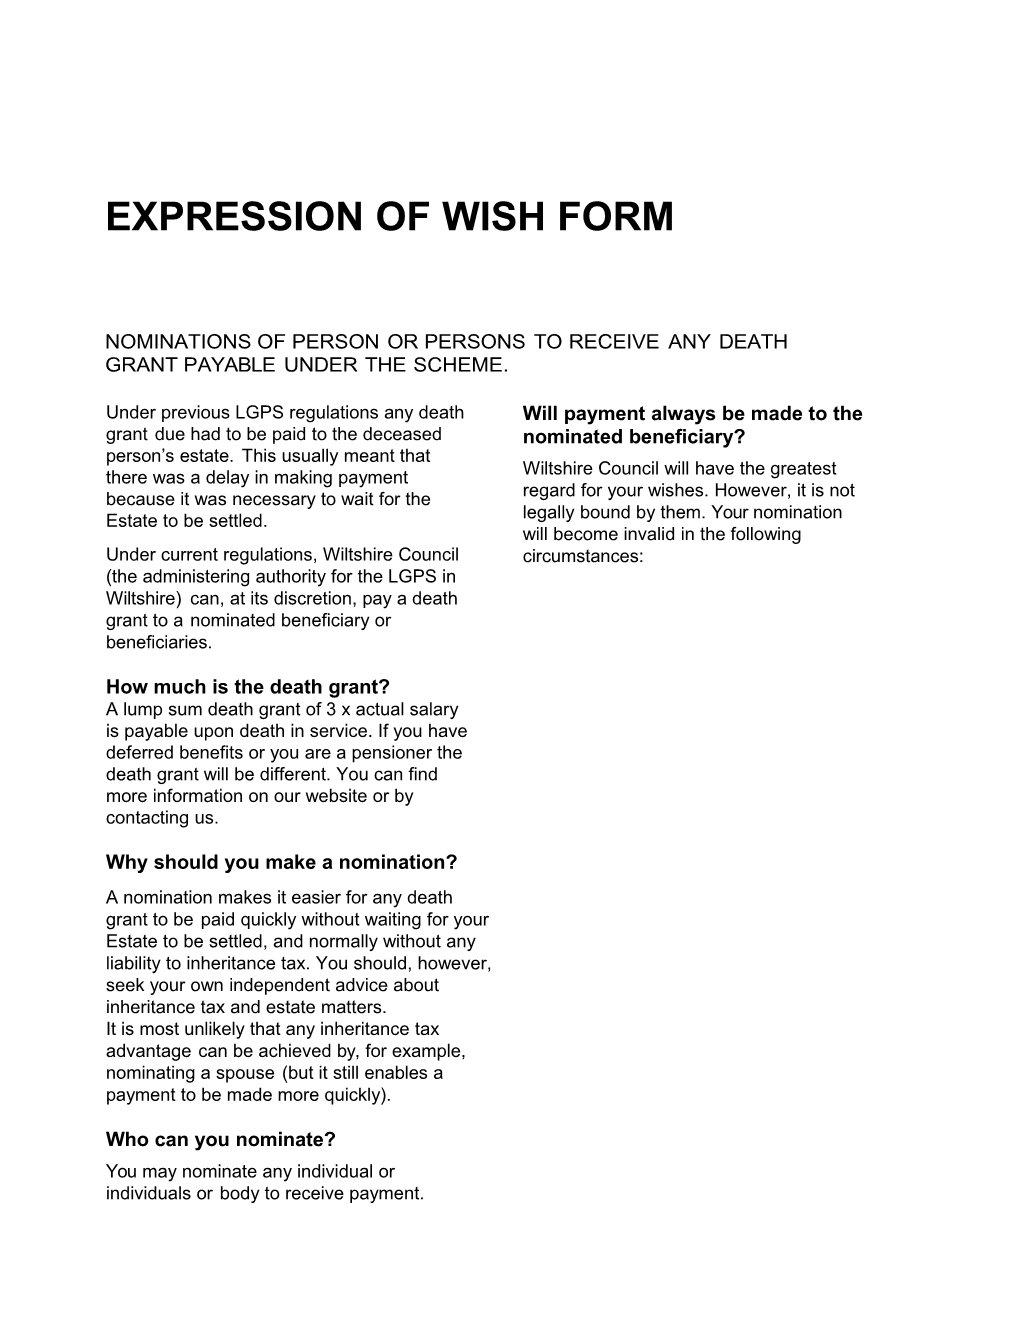 Expression-Of-Wish-Form-2014